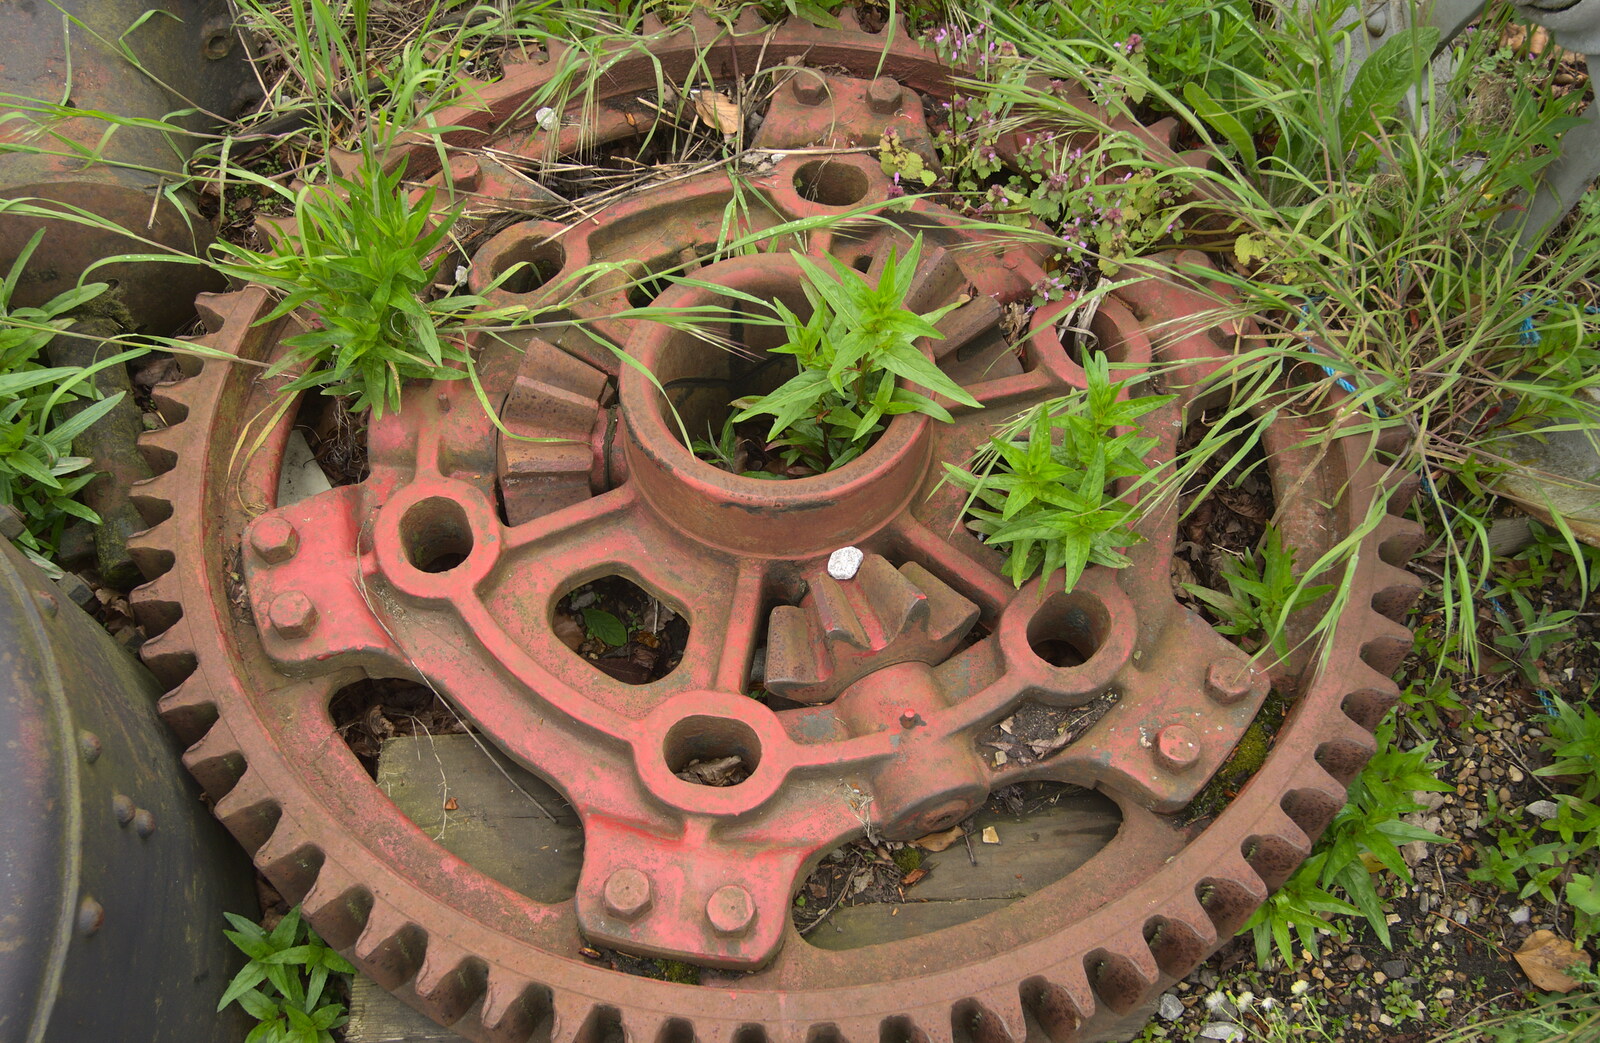 A red cog and some green weeds from A Day at Bressingham Steam and Gardens, Diss, Norfolk - 18th May 2013